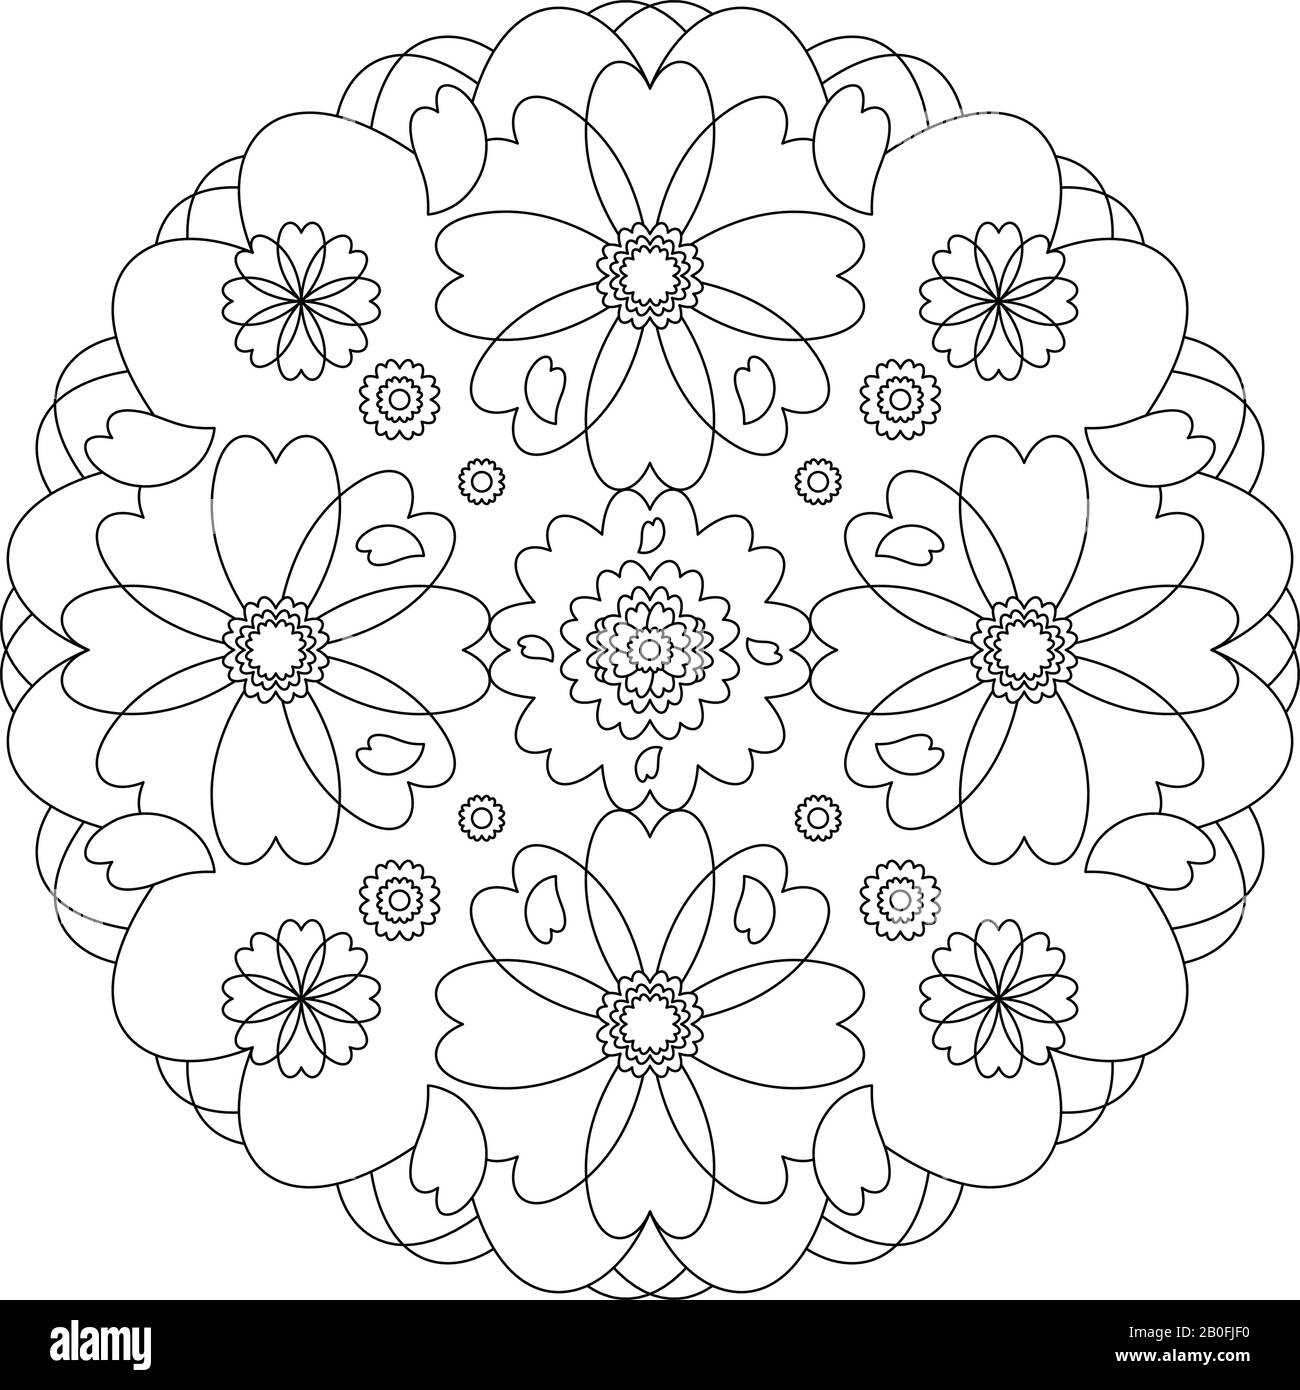 Mandala art cut out stock images pictures